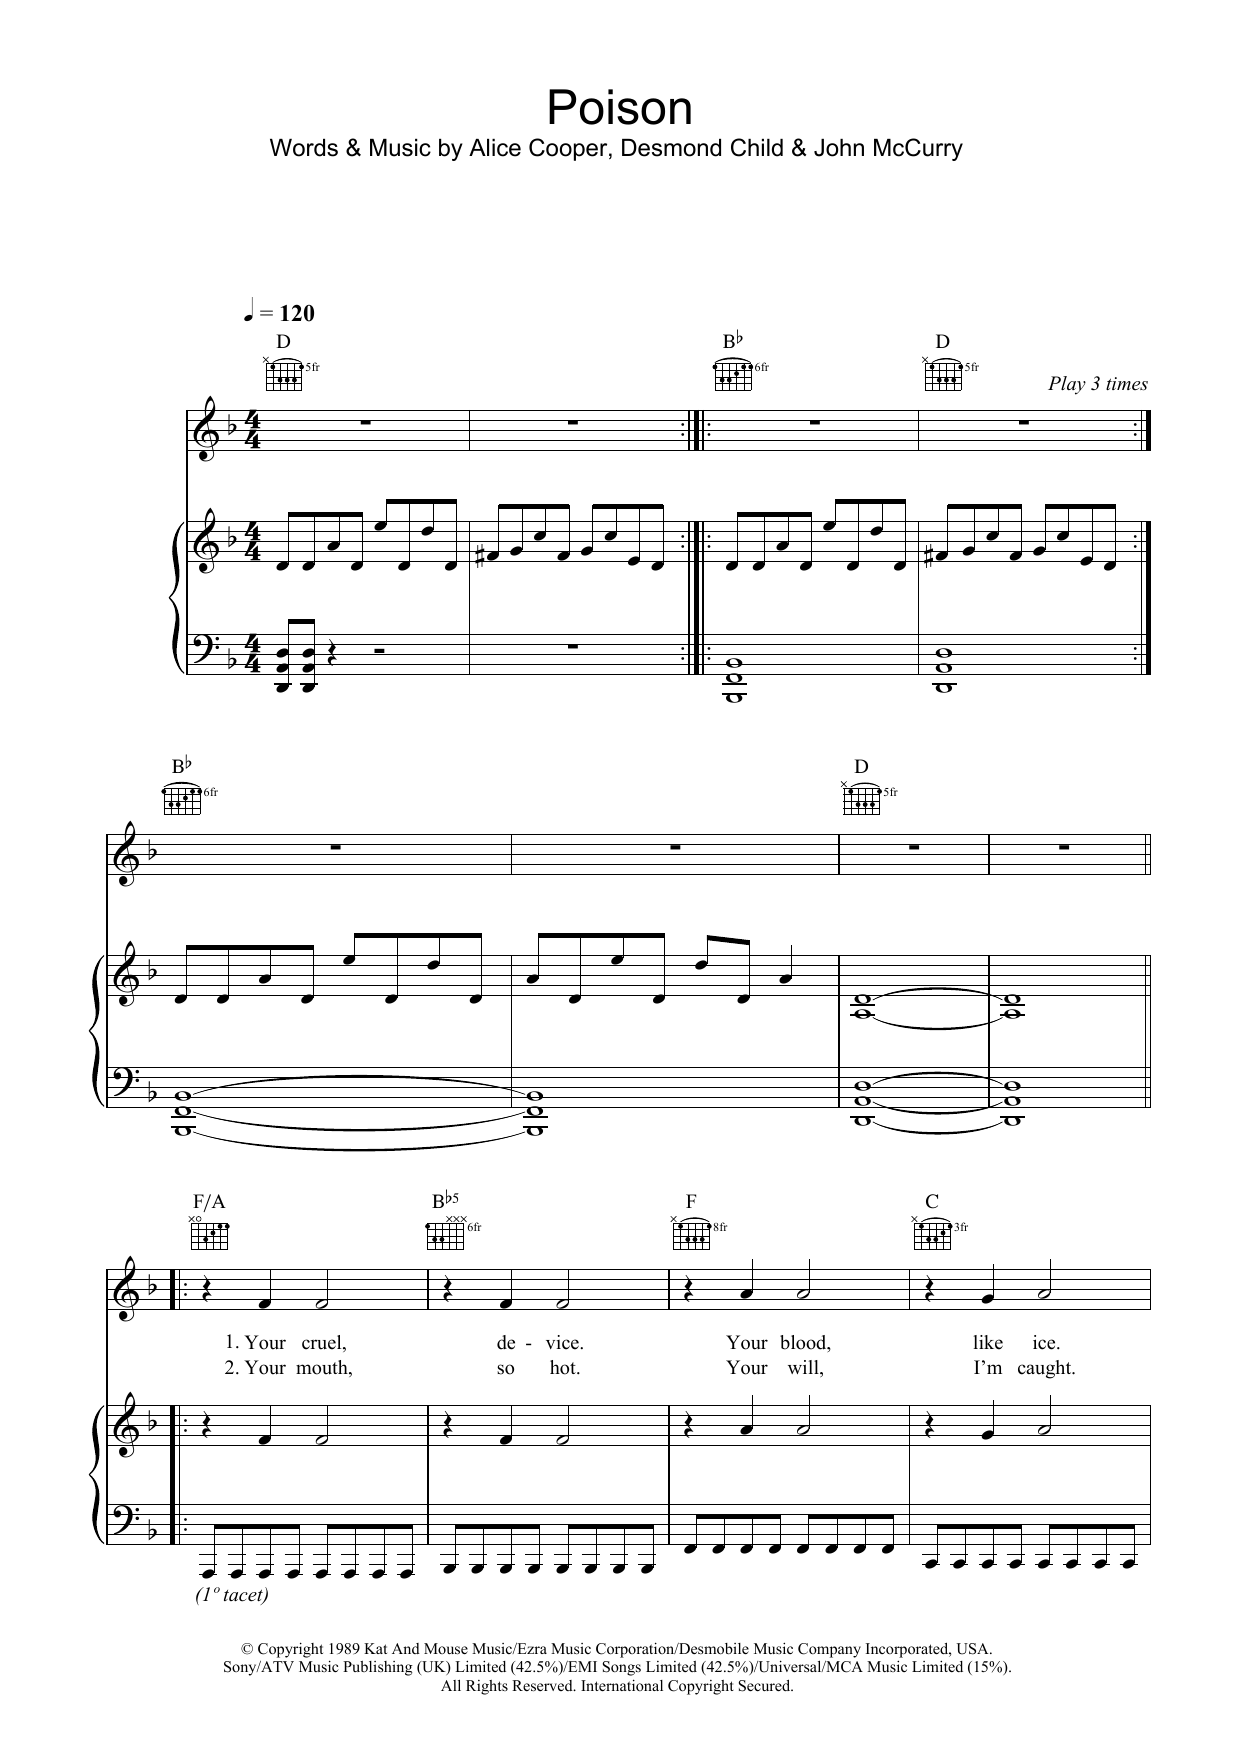 Download Alice Cooper Poison Sheet Music